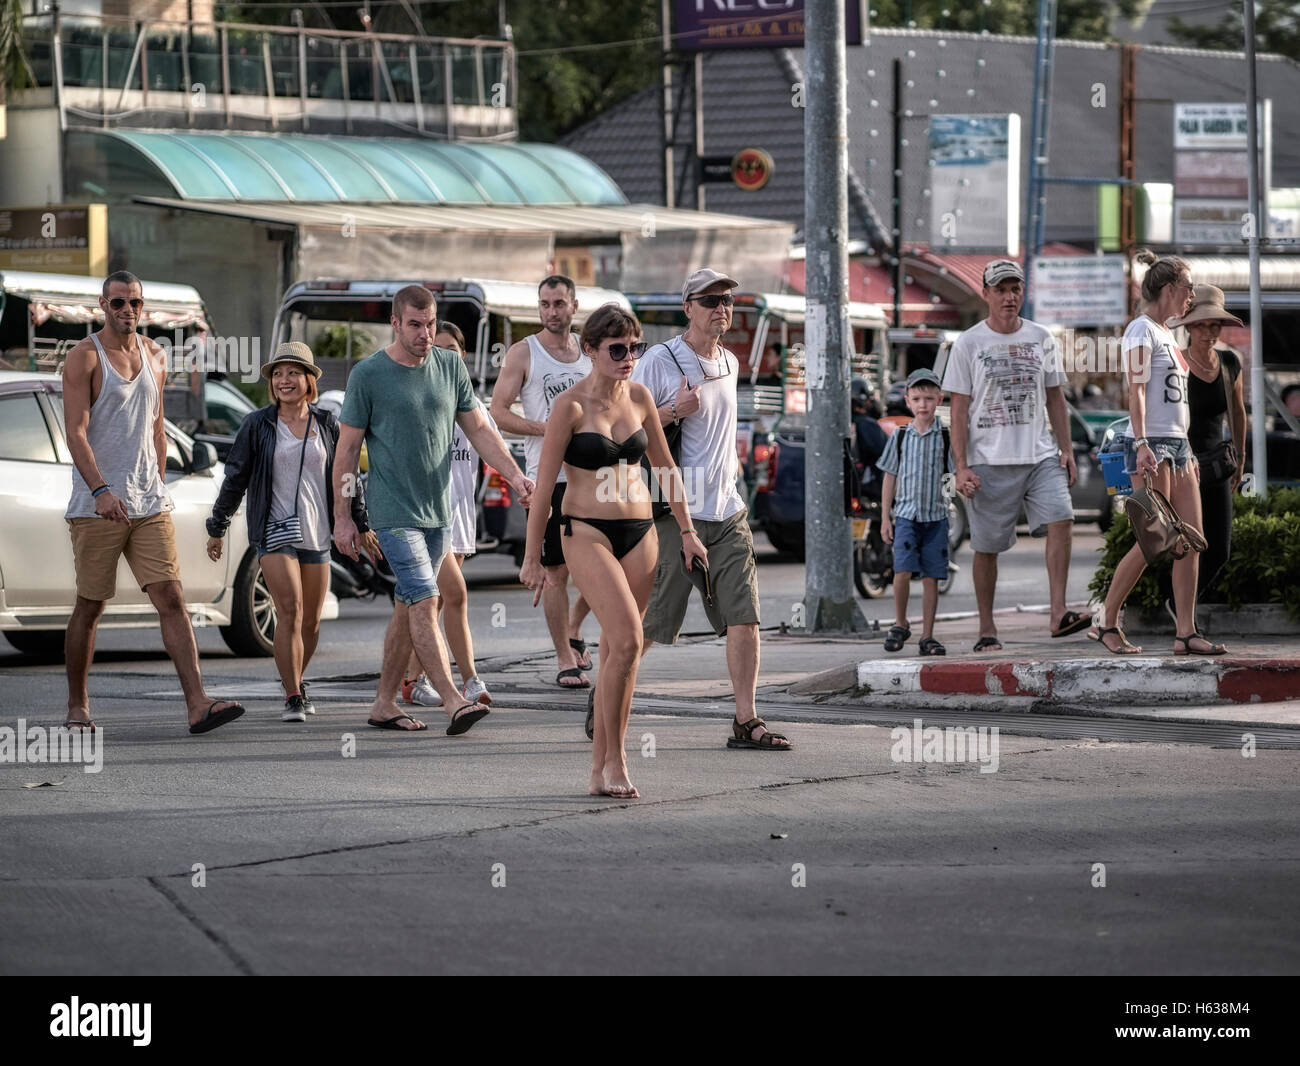 Bikini street. Standing out from the crowd. Bikini clad woman in the street drawing amusing glances from onlookers. Pattaya Thailand S. E. Asia Stock Photo